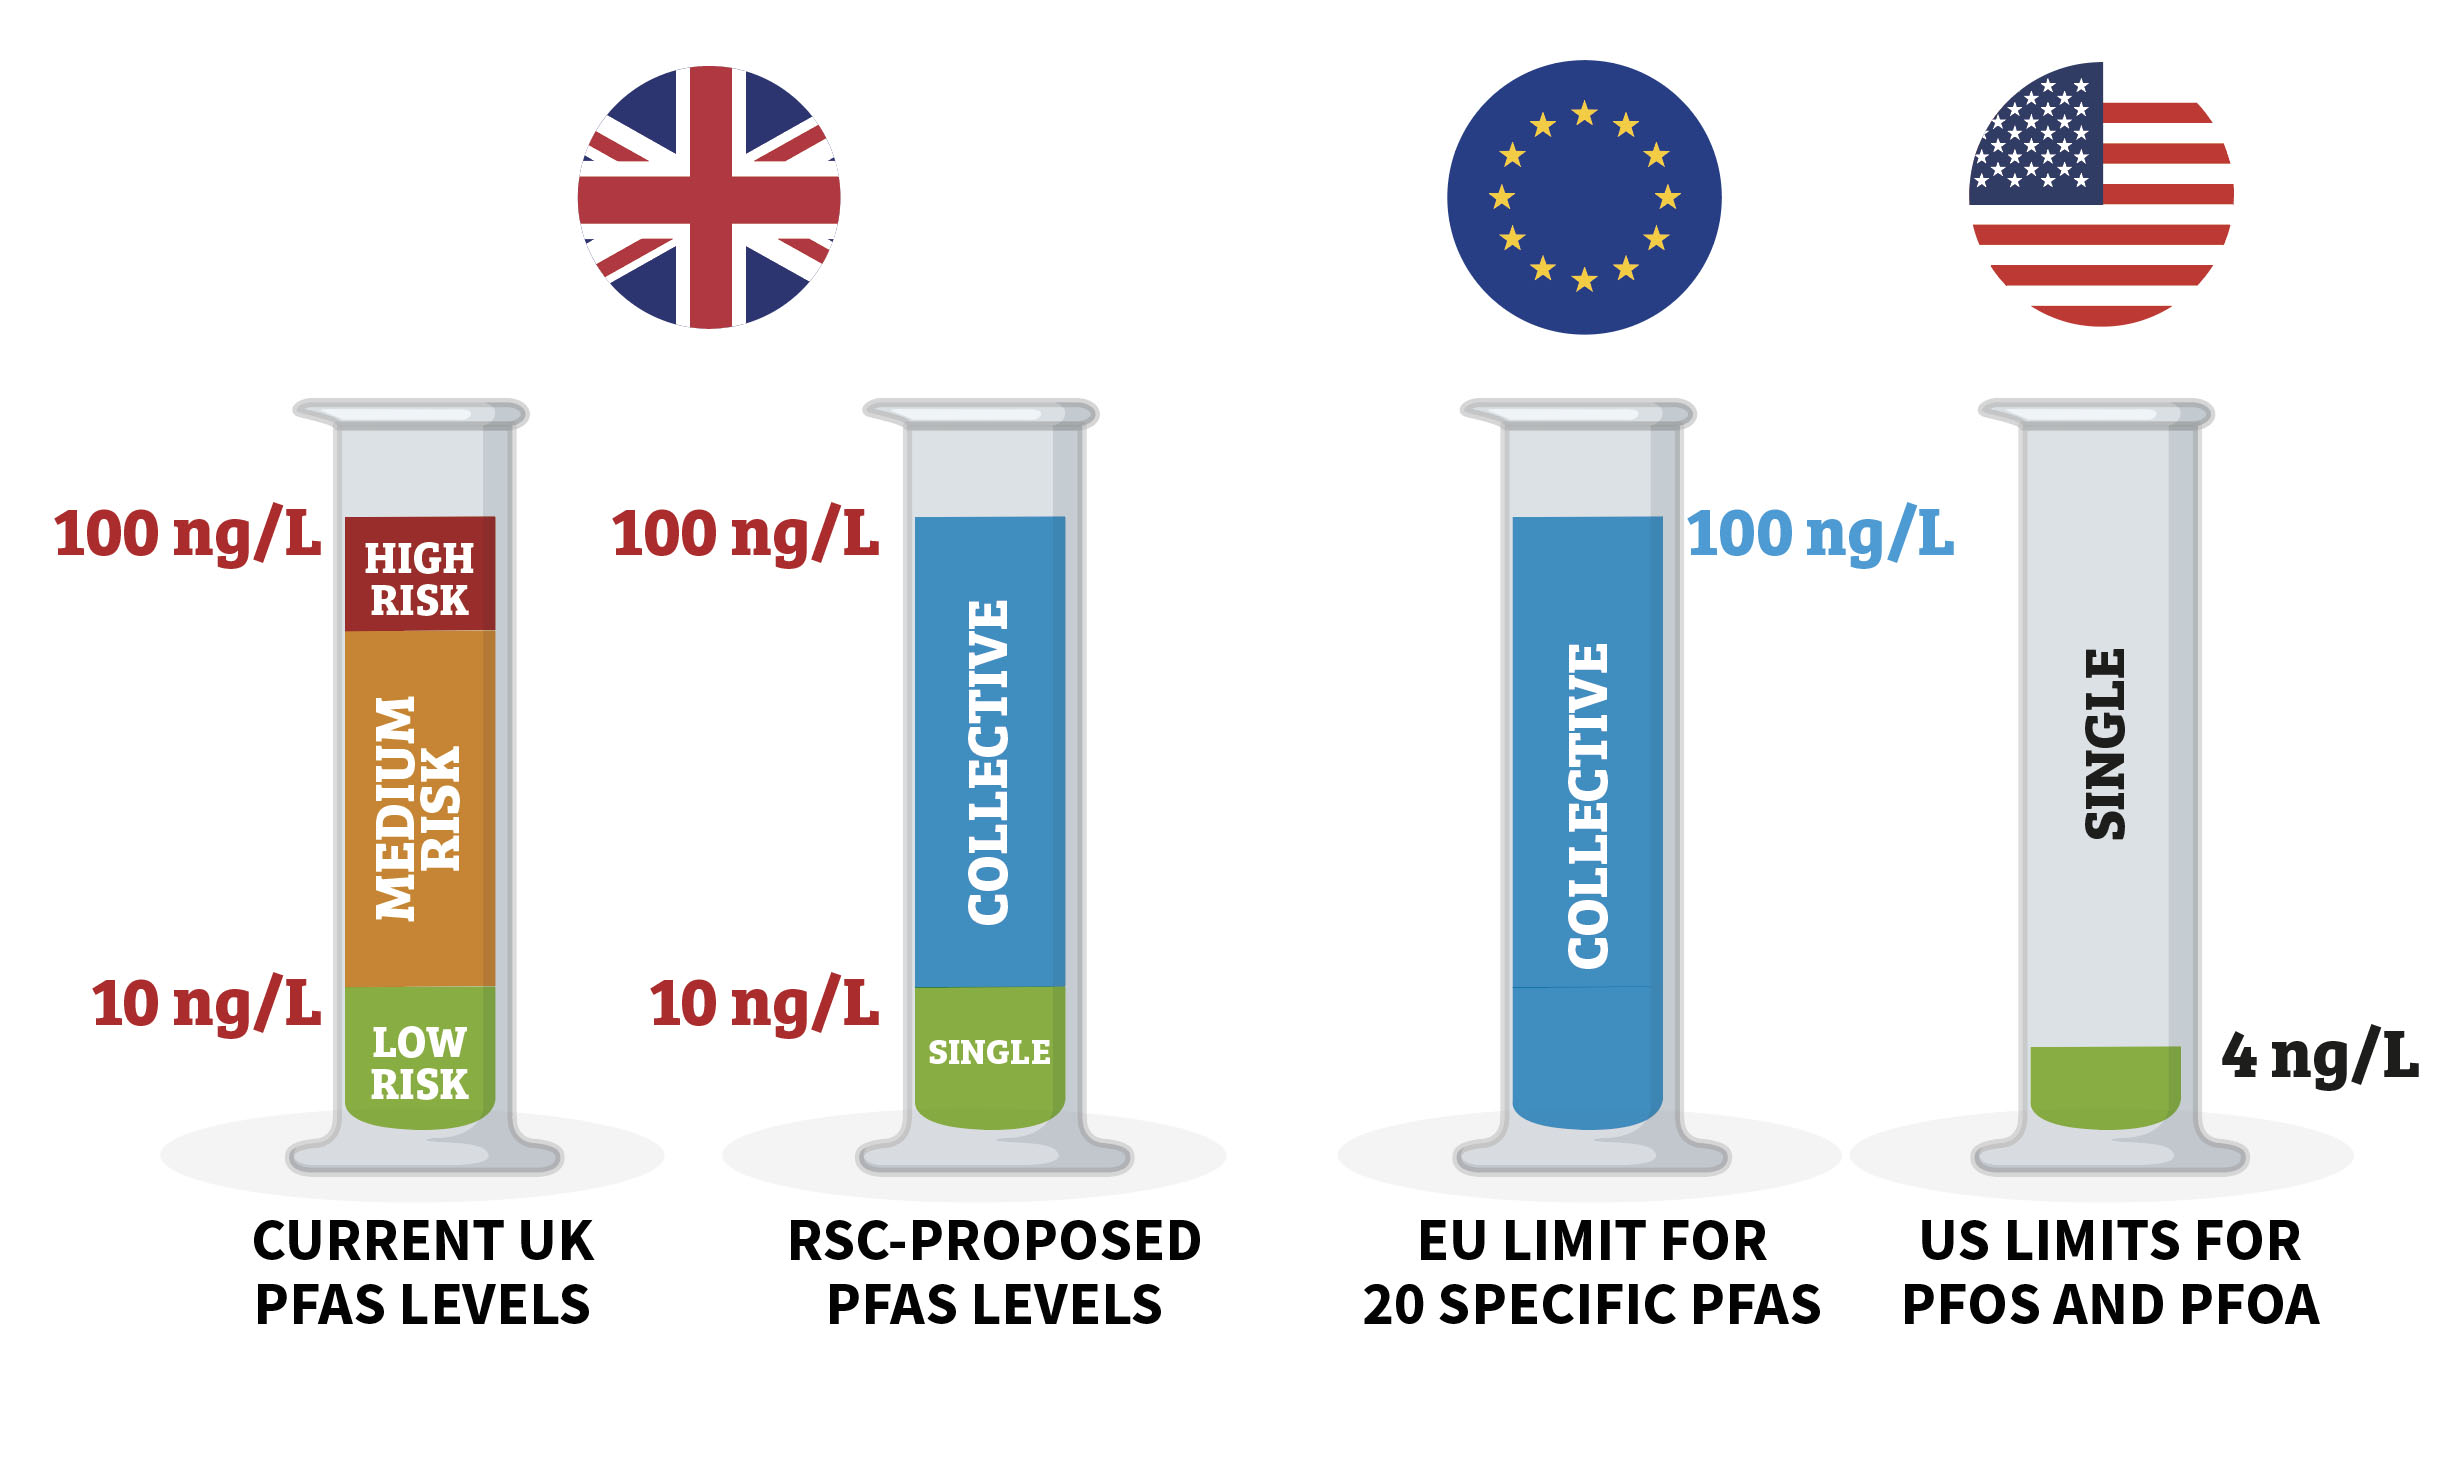 visual in a bar chart form, using test tubes as the bars, compares what the levels are with what we recommend and what they are for the EU and USA which are stats previously mentioned in the text